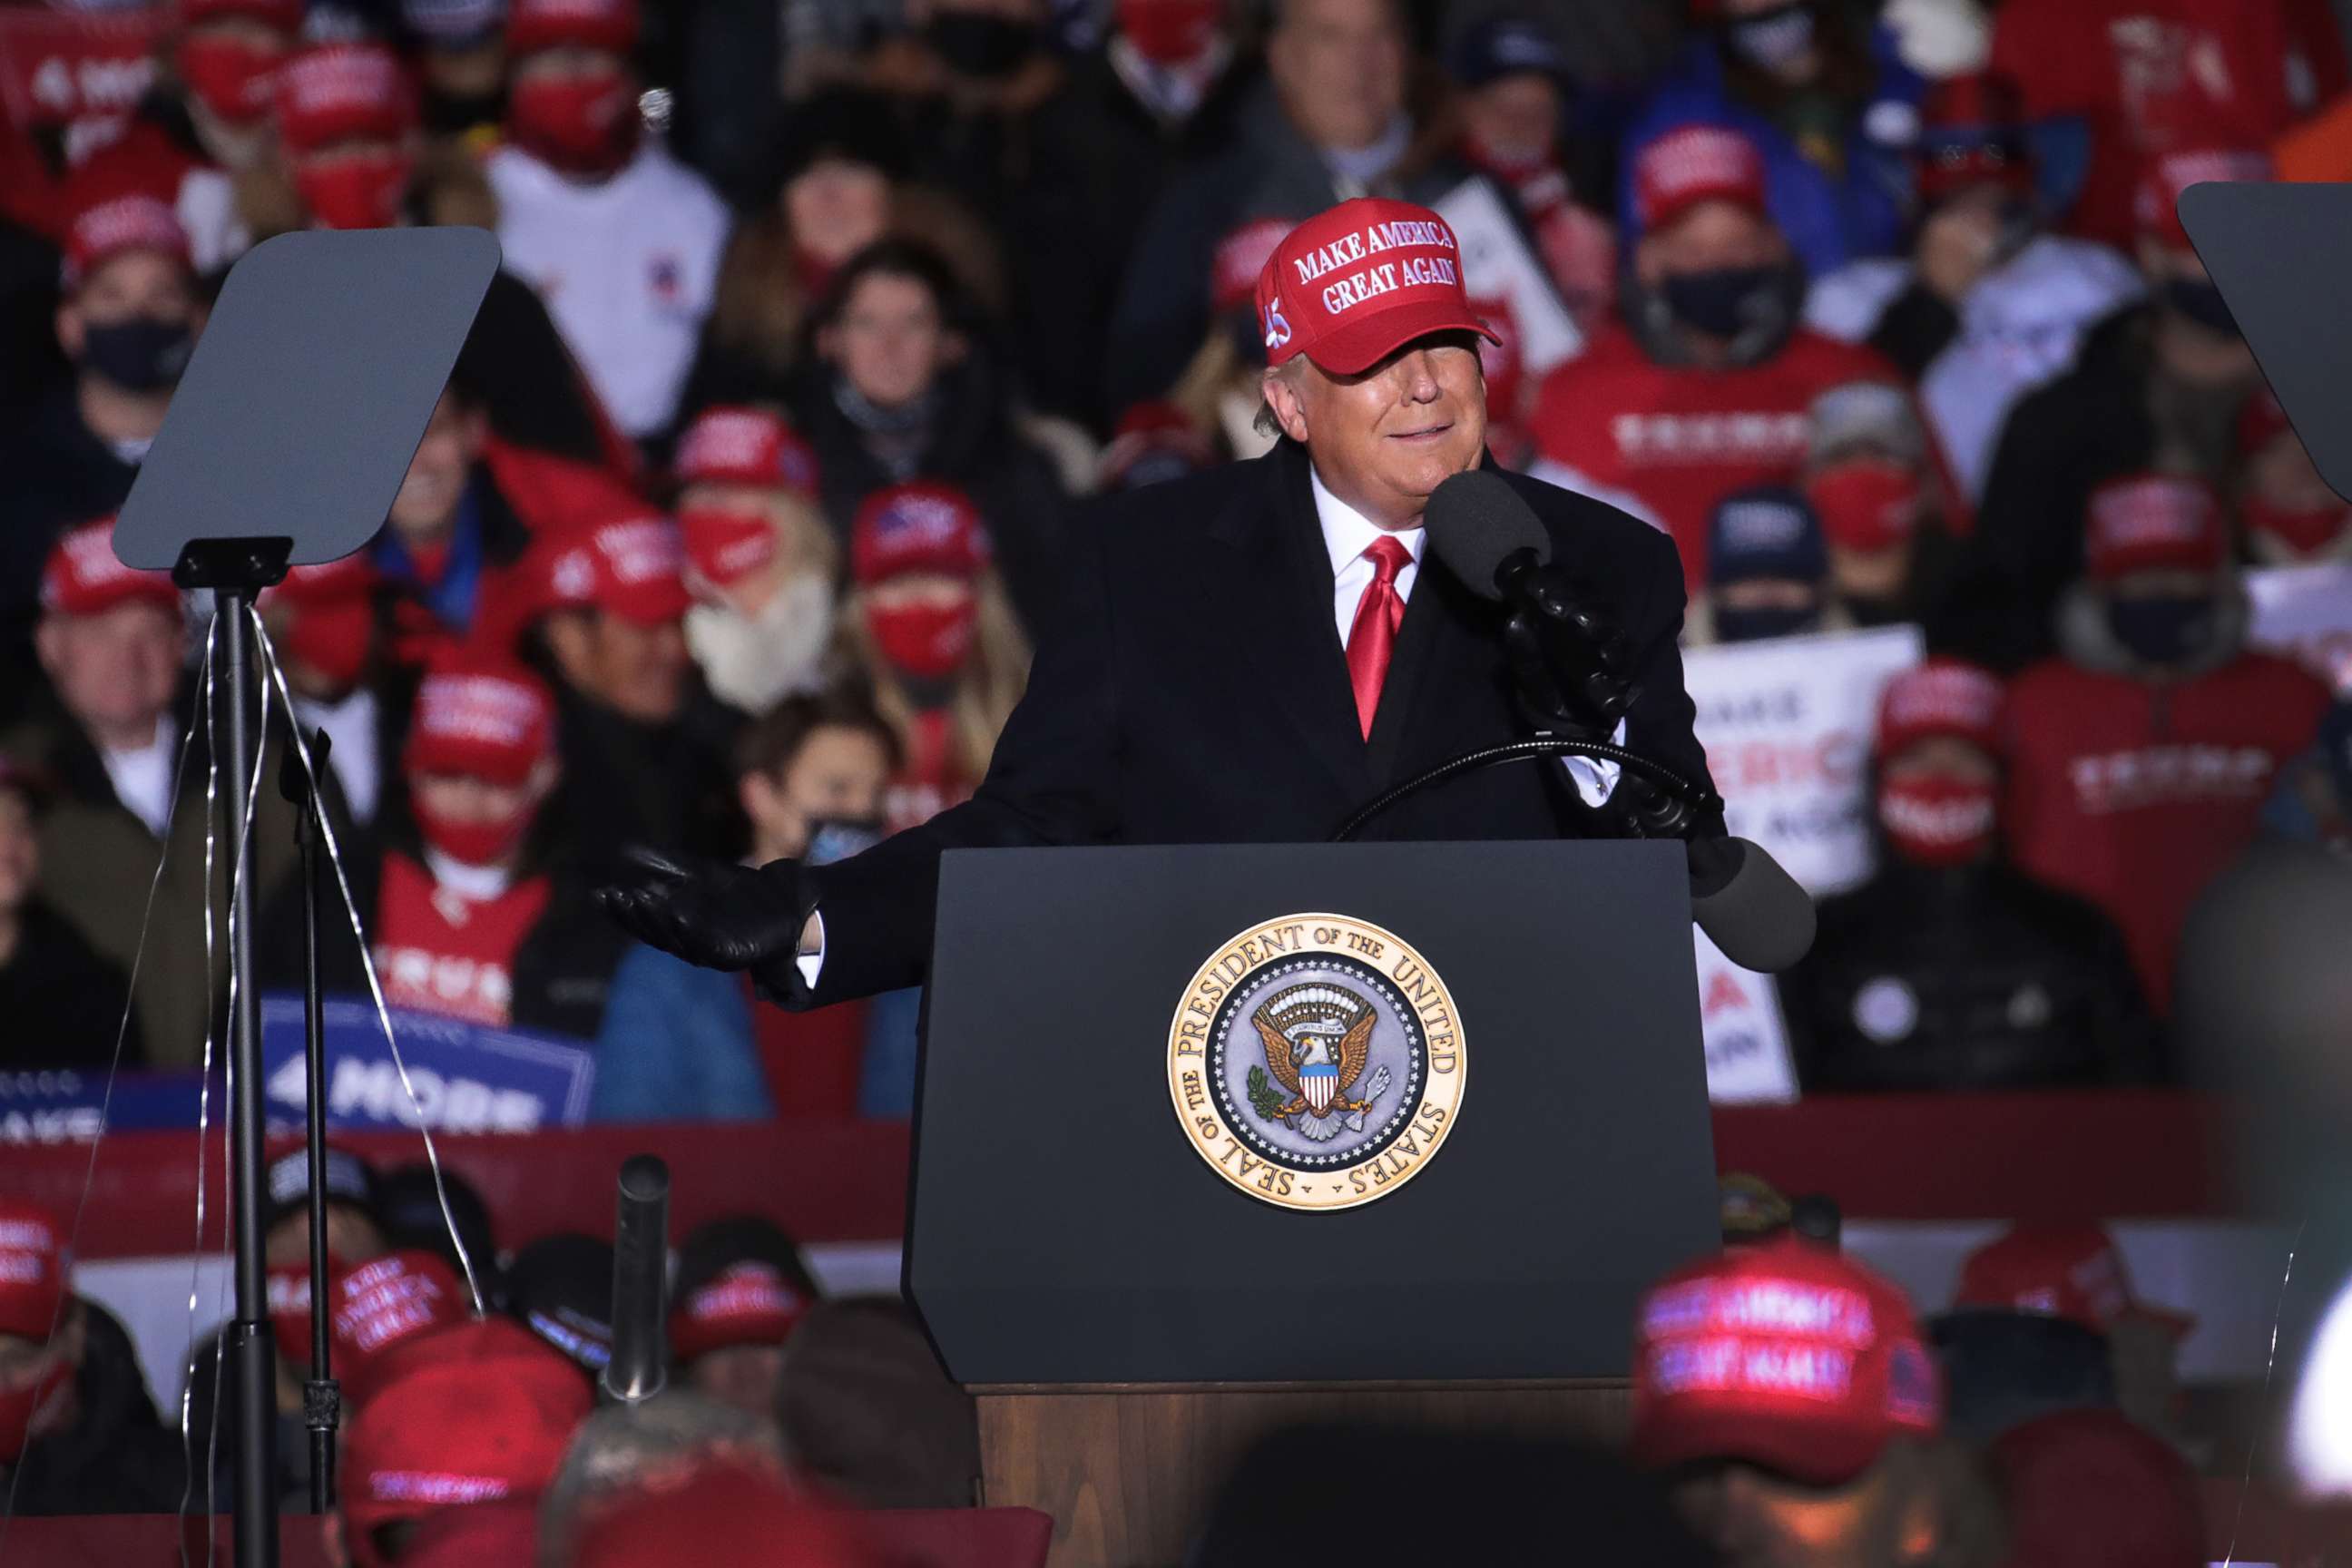 PHOTO: President Donald Trump speaks to supporters during a campaign rally at the Kenosha Regional Airport, Nov. 2, 2020, in Kenosha, Wisconsin.